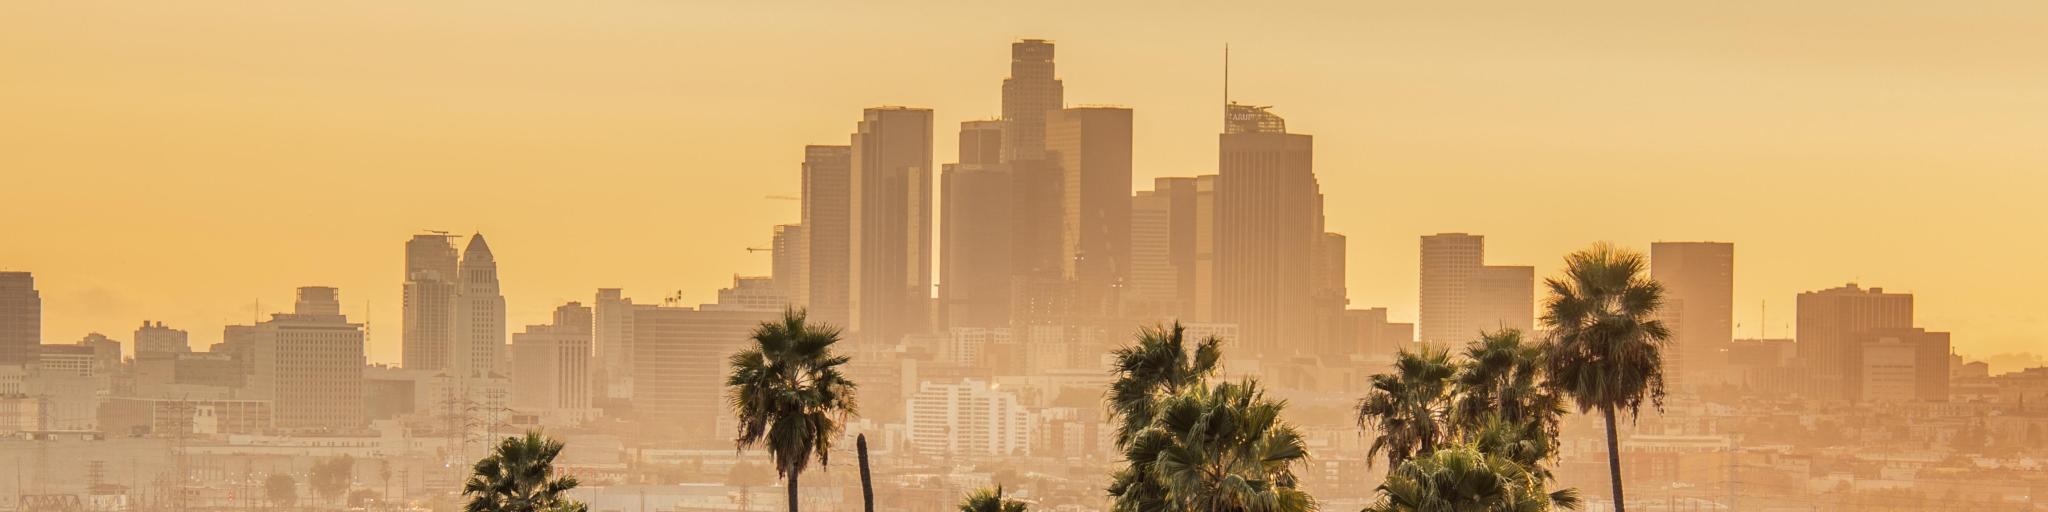 Los Angeles Skyline During Golden Hour with palm trees in the foreground.